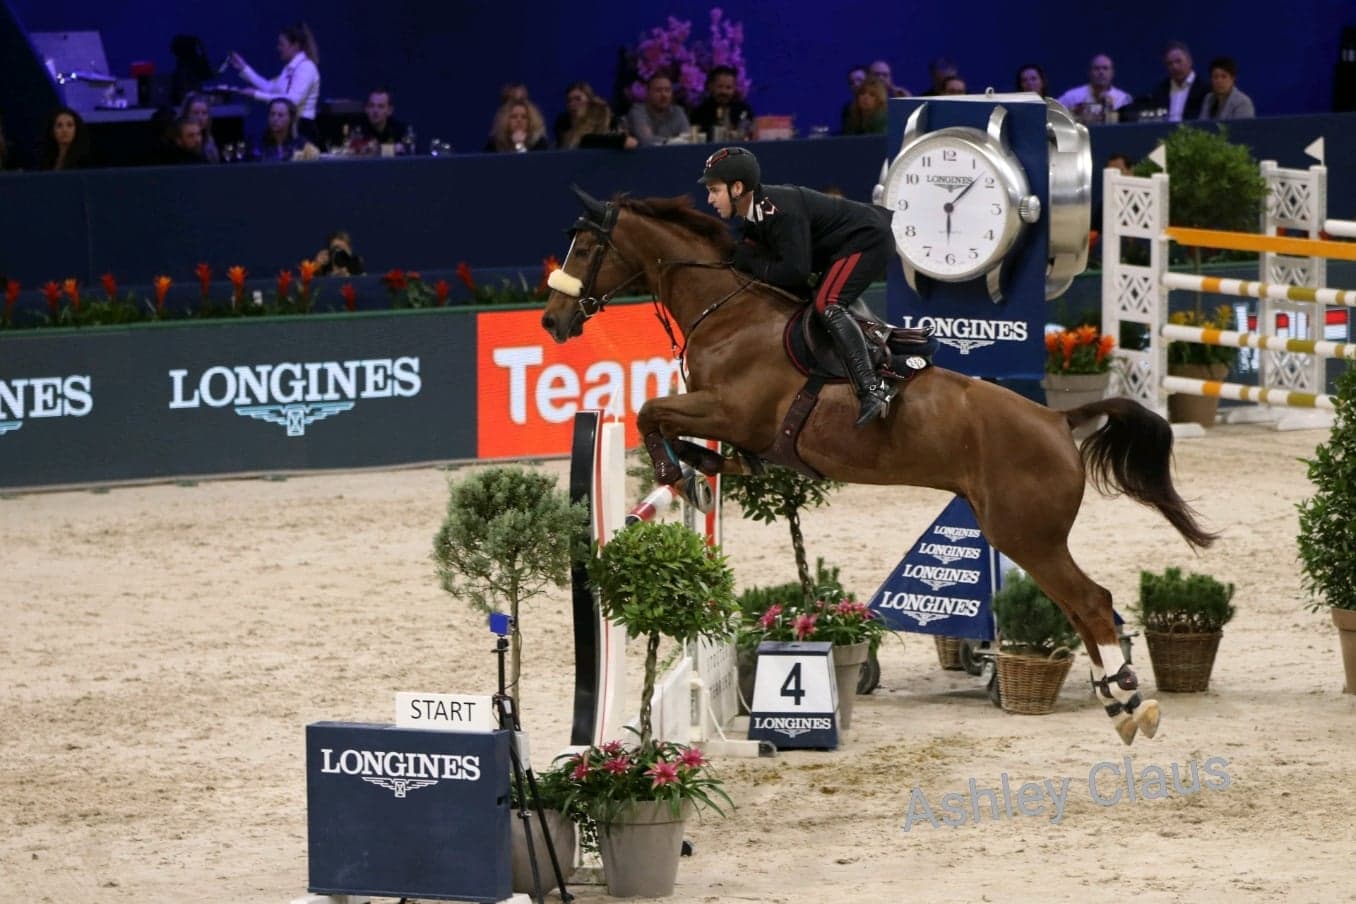 Emanuele Gaudiano claims first place in Amsterdam's CSI5* ranking class